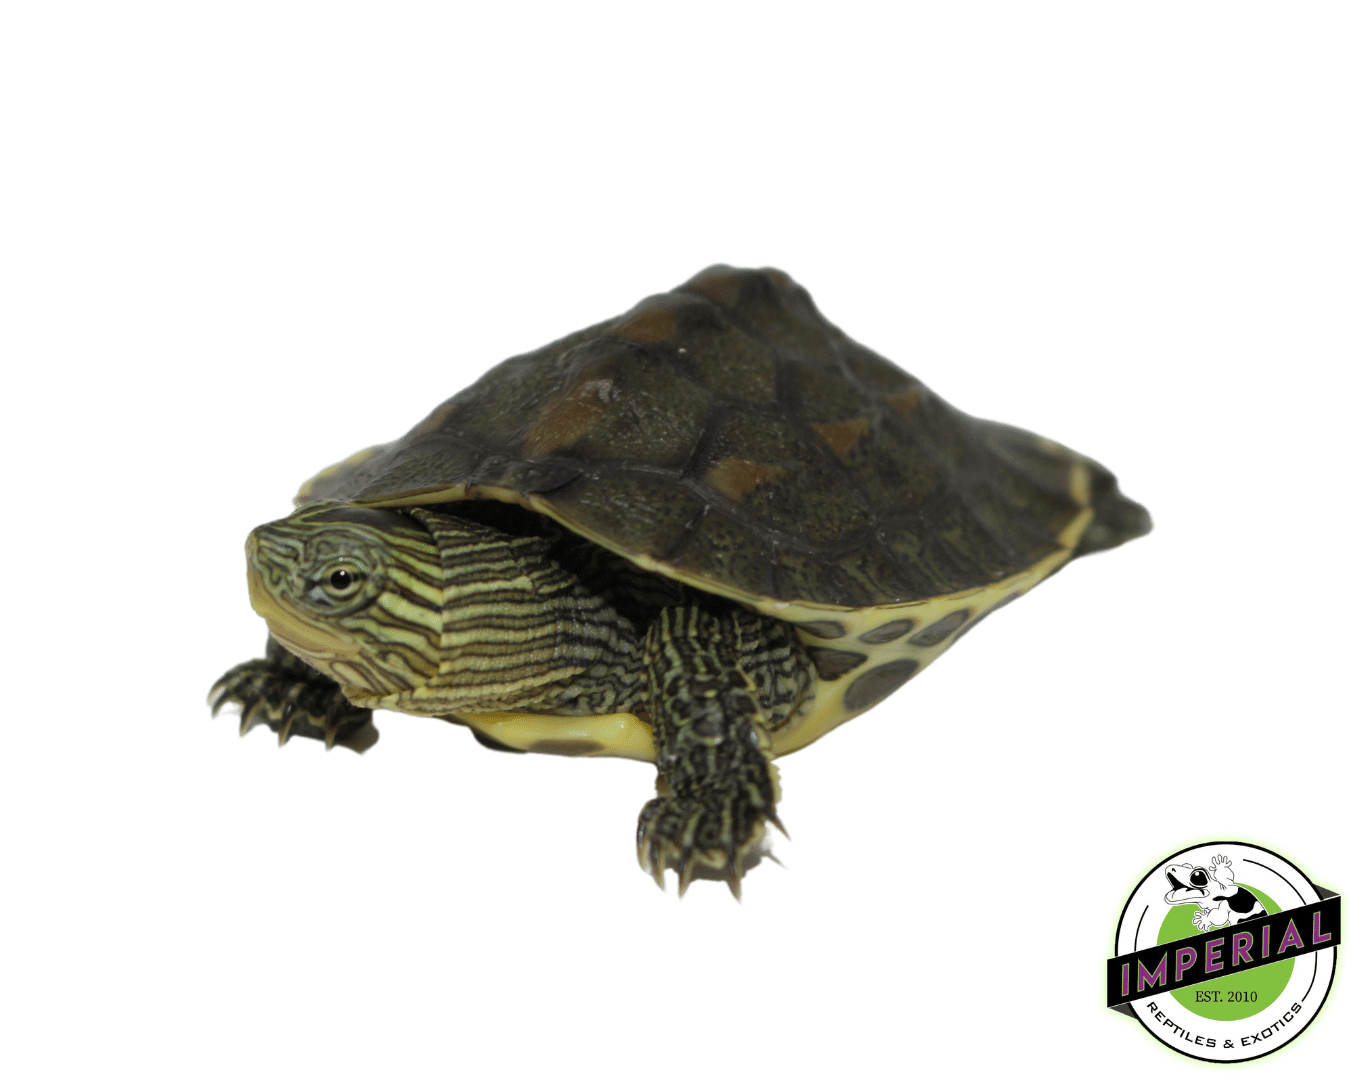 chinese golden thread turtle for sale, buy reptiles online